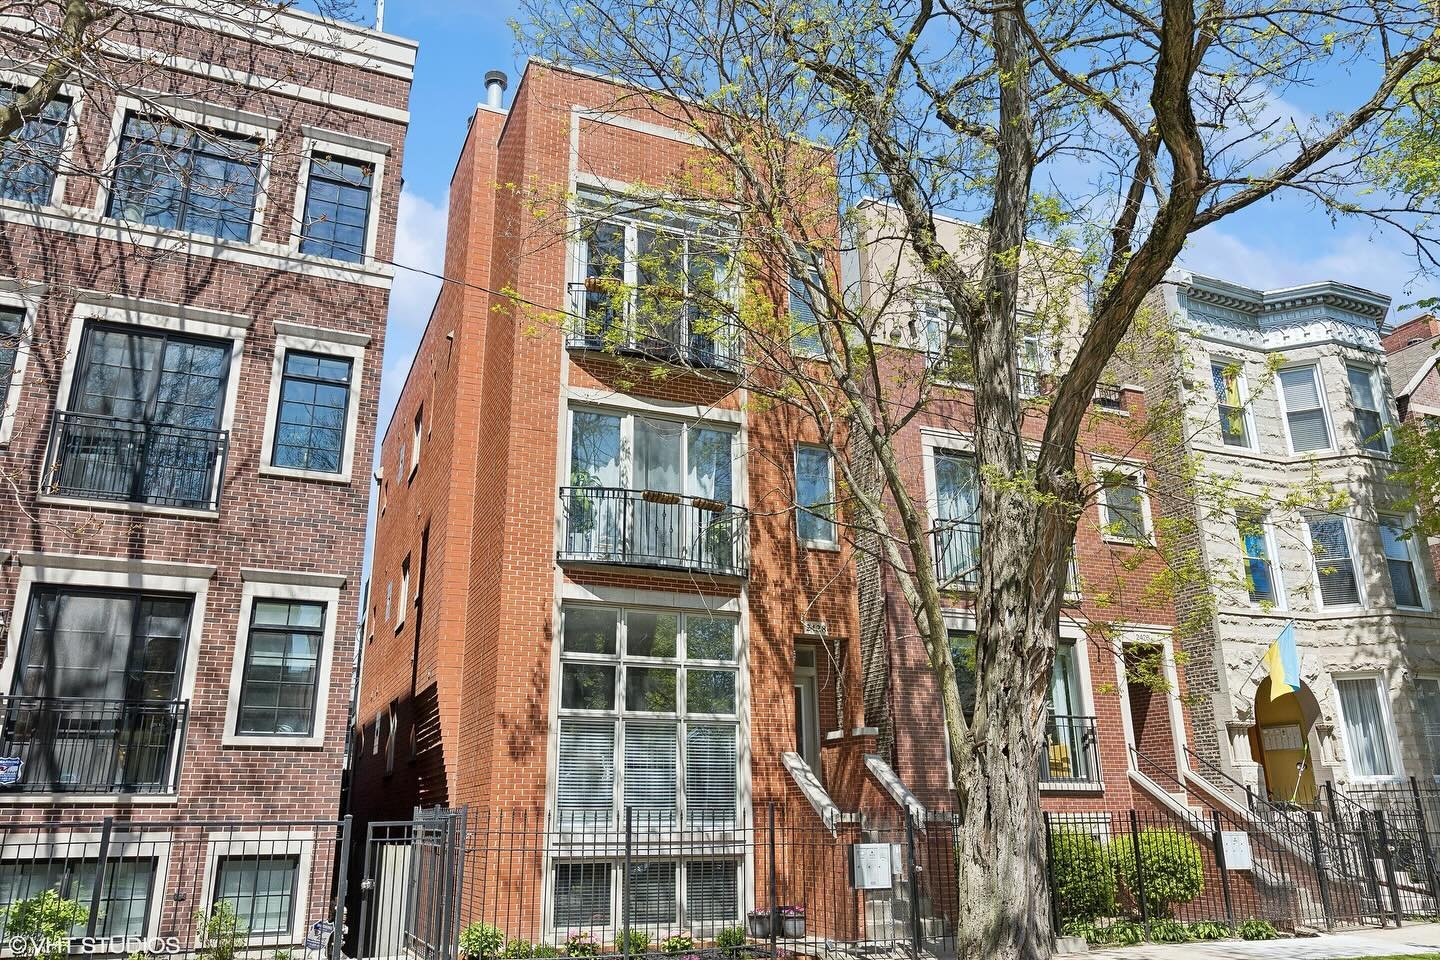 JUST LISTED!

2428 W Cortez St #3

$500,000

Extremely well cared for 2 bedroom 2.5 bathroom top floor condo in an ALL BRICK building in West Town with a full rooftop deck! This bright and cheery top floor unit has tall ceilings and abundant natural 